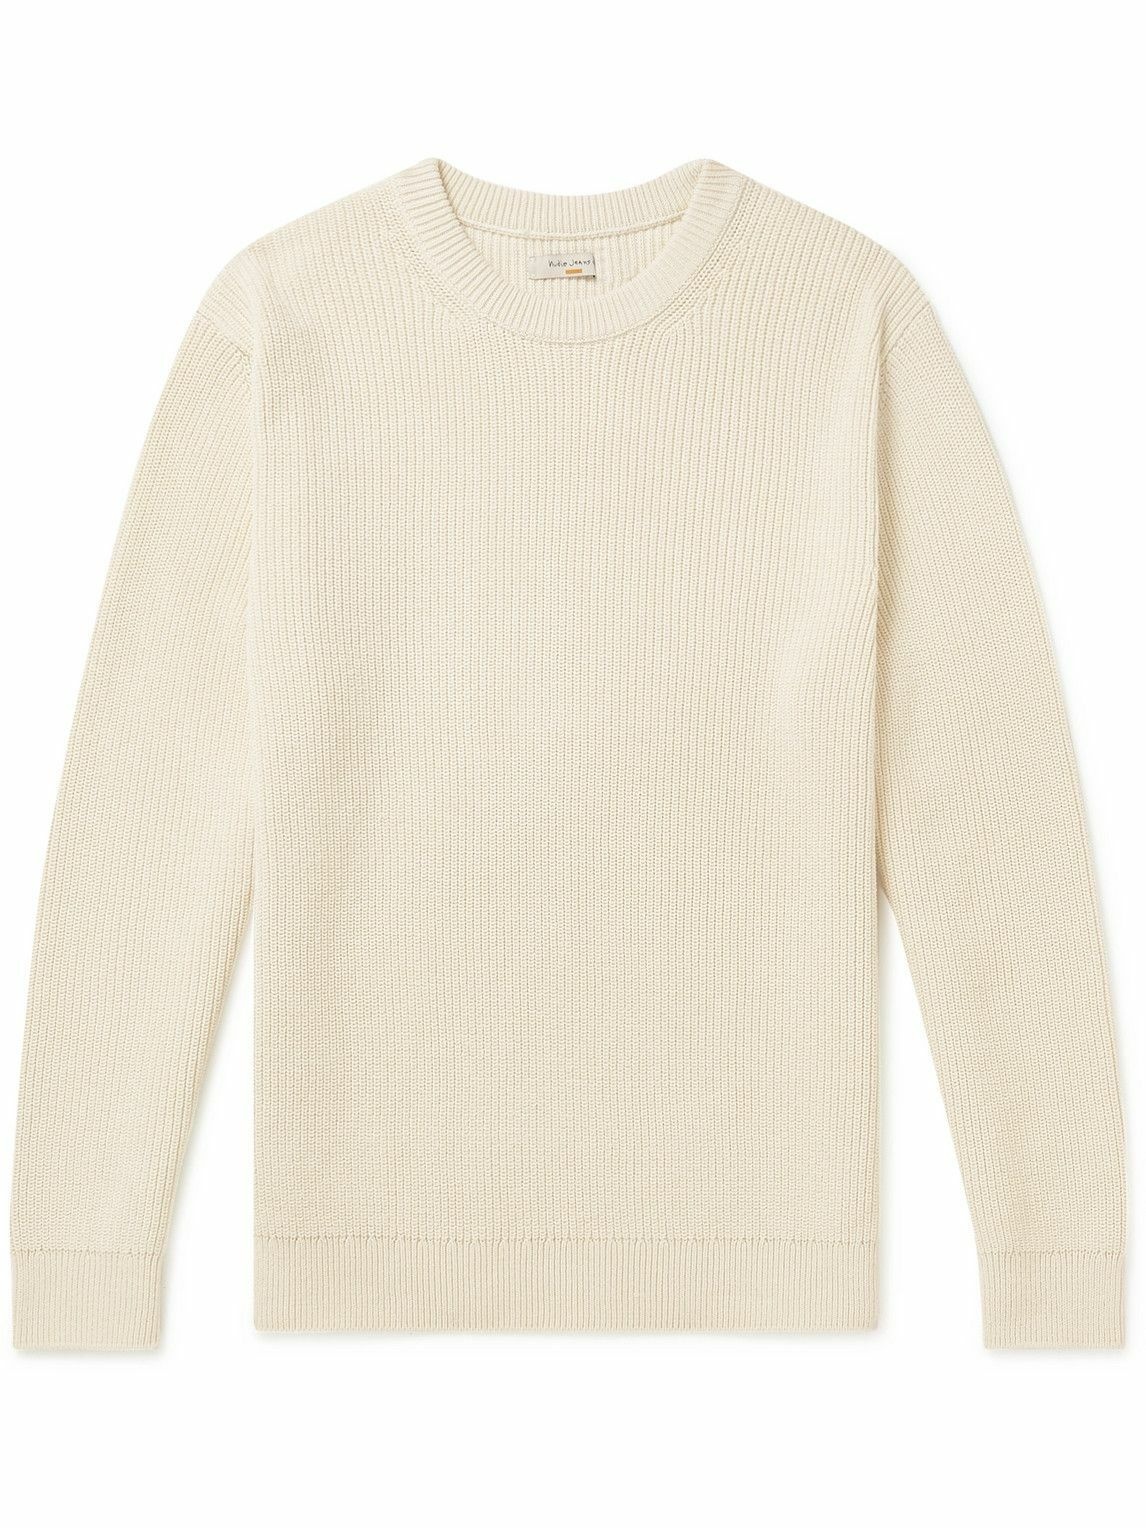 Nudie Jeans - August Ribbed Cotton Sweater - Neutrals Nudie Jeans Co